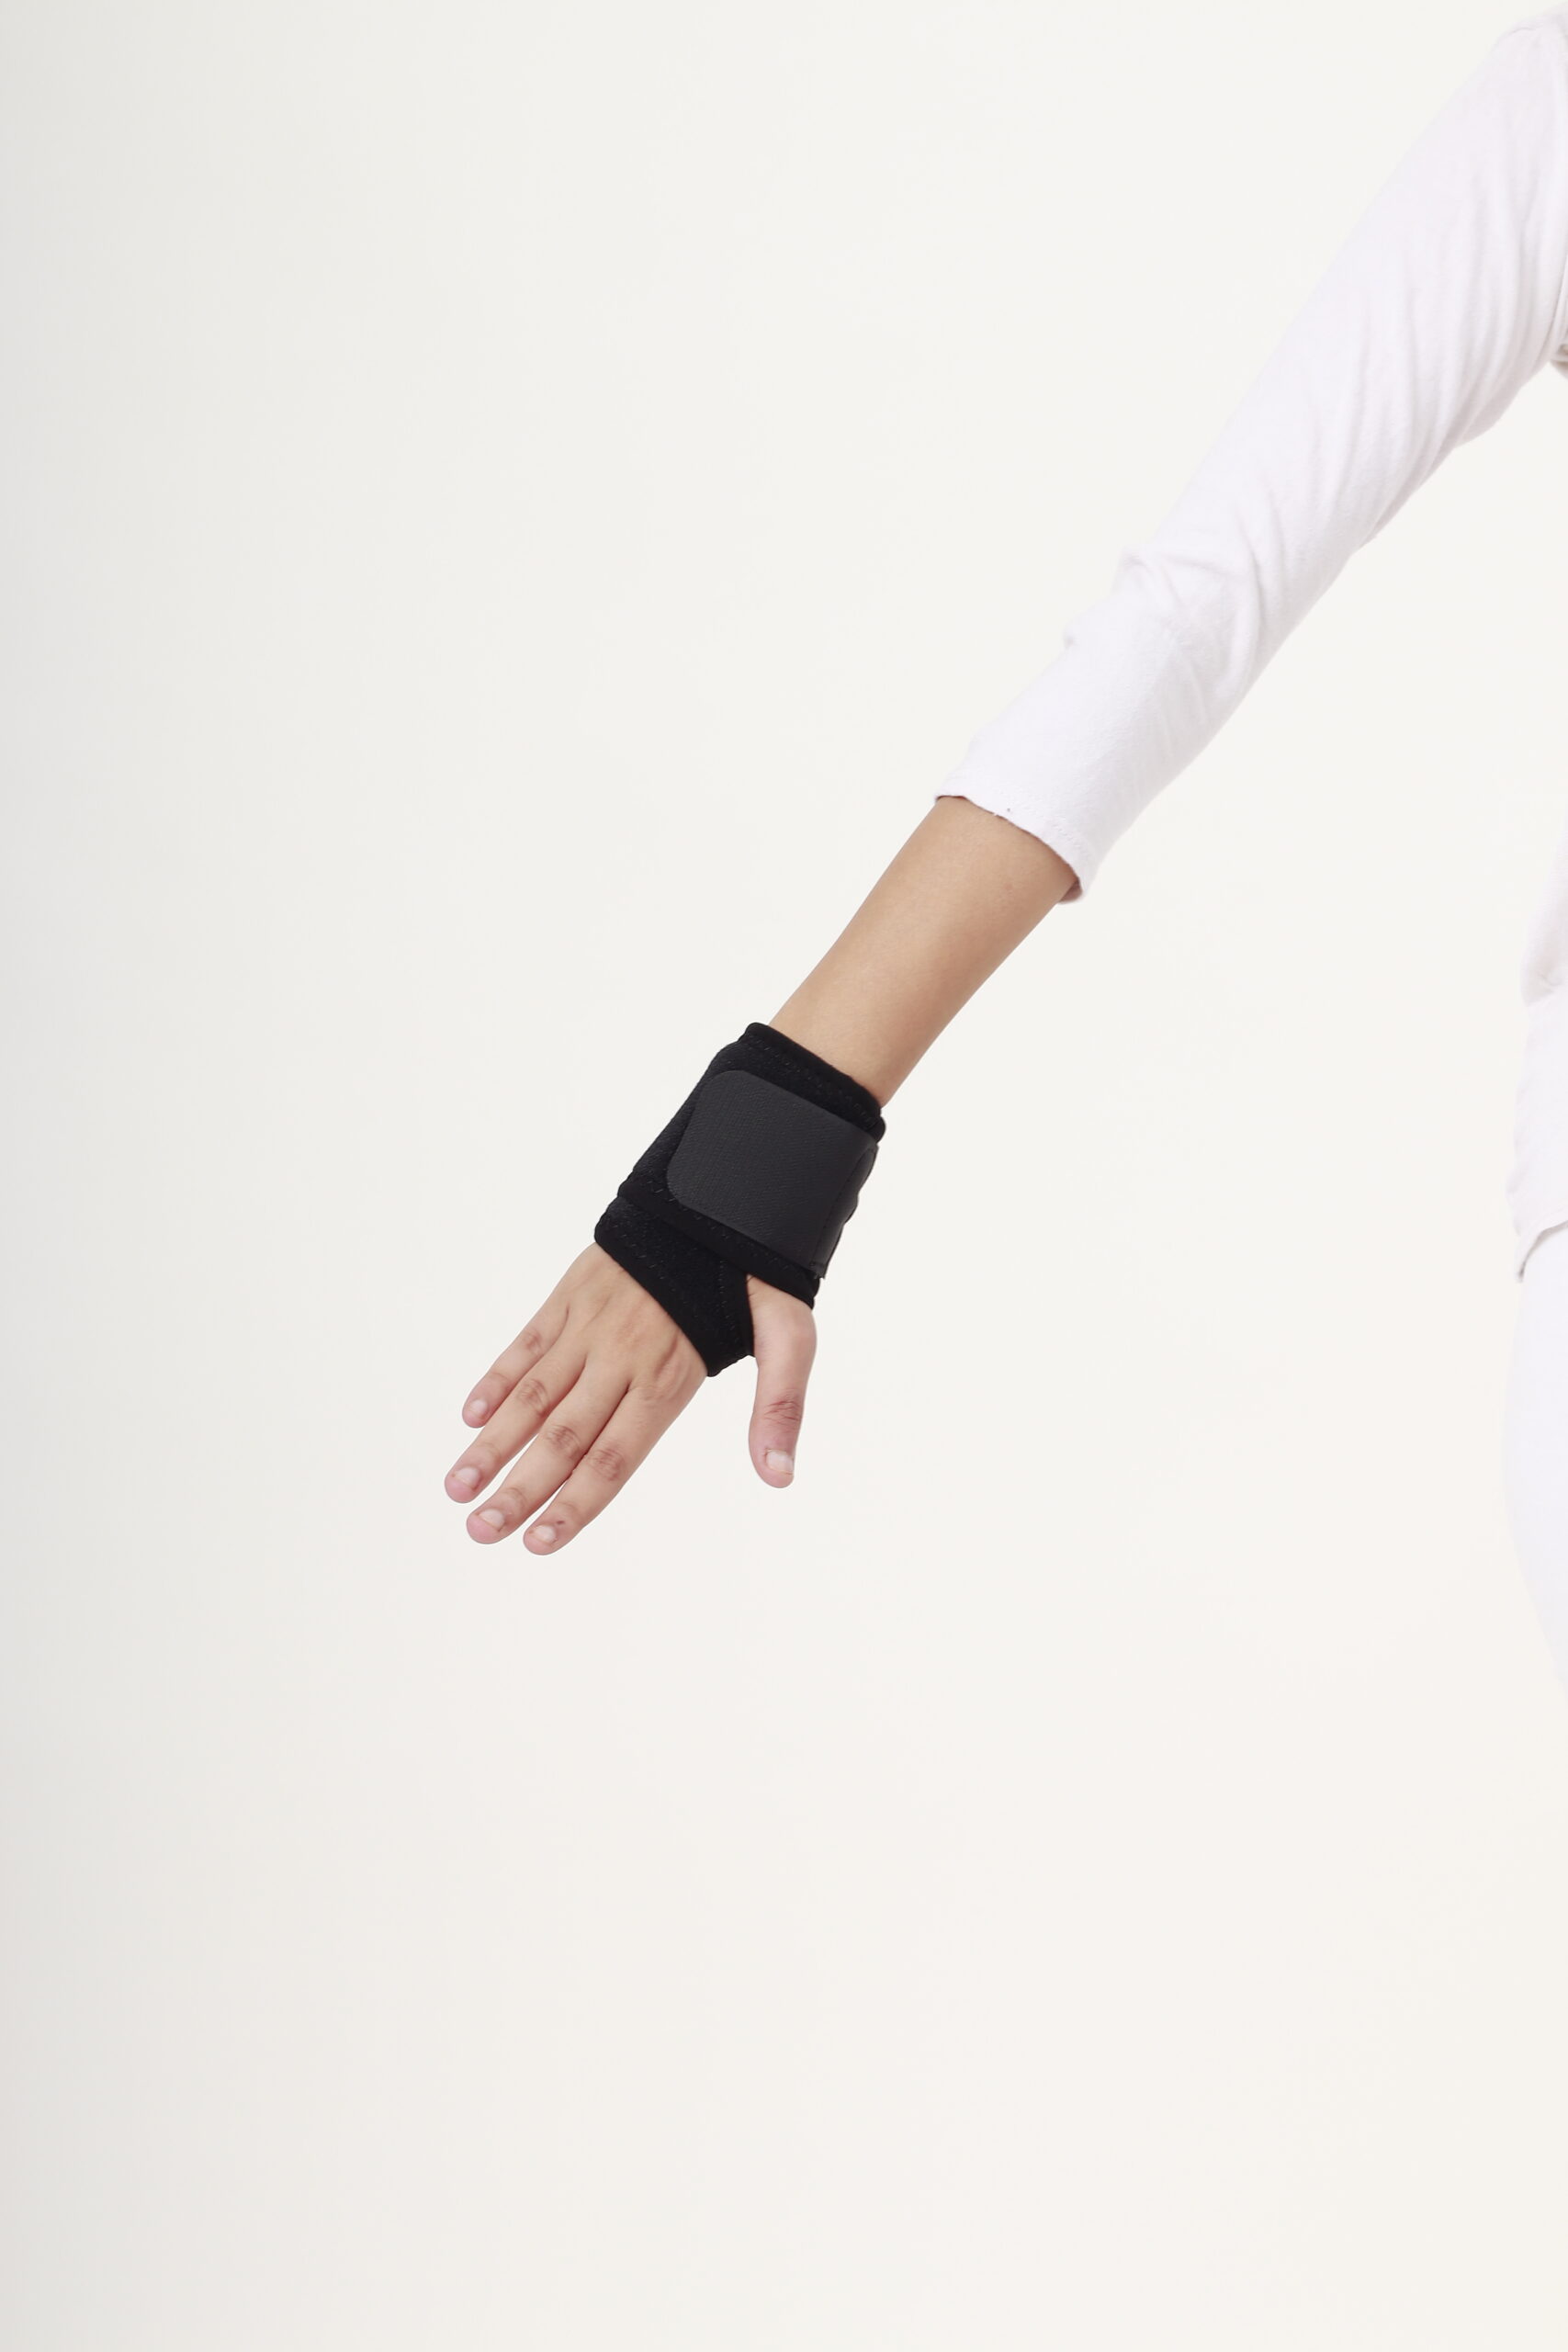 wrist-wrap-with-thumb-support